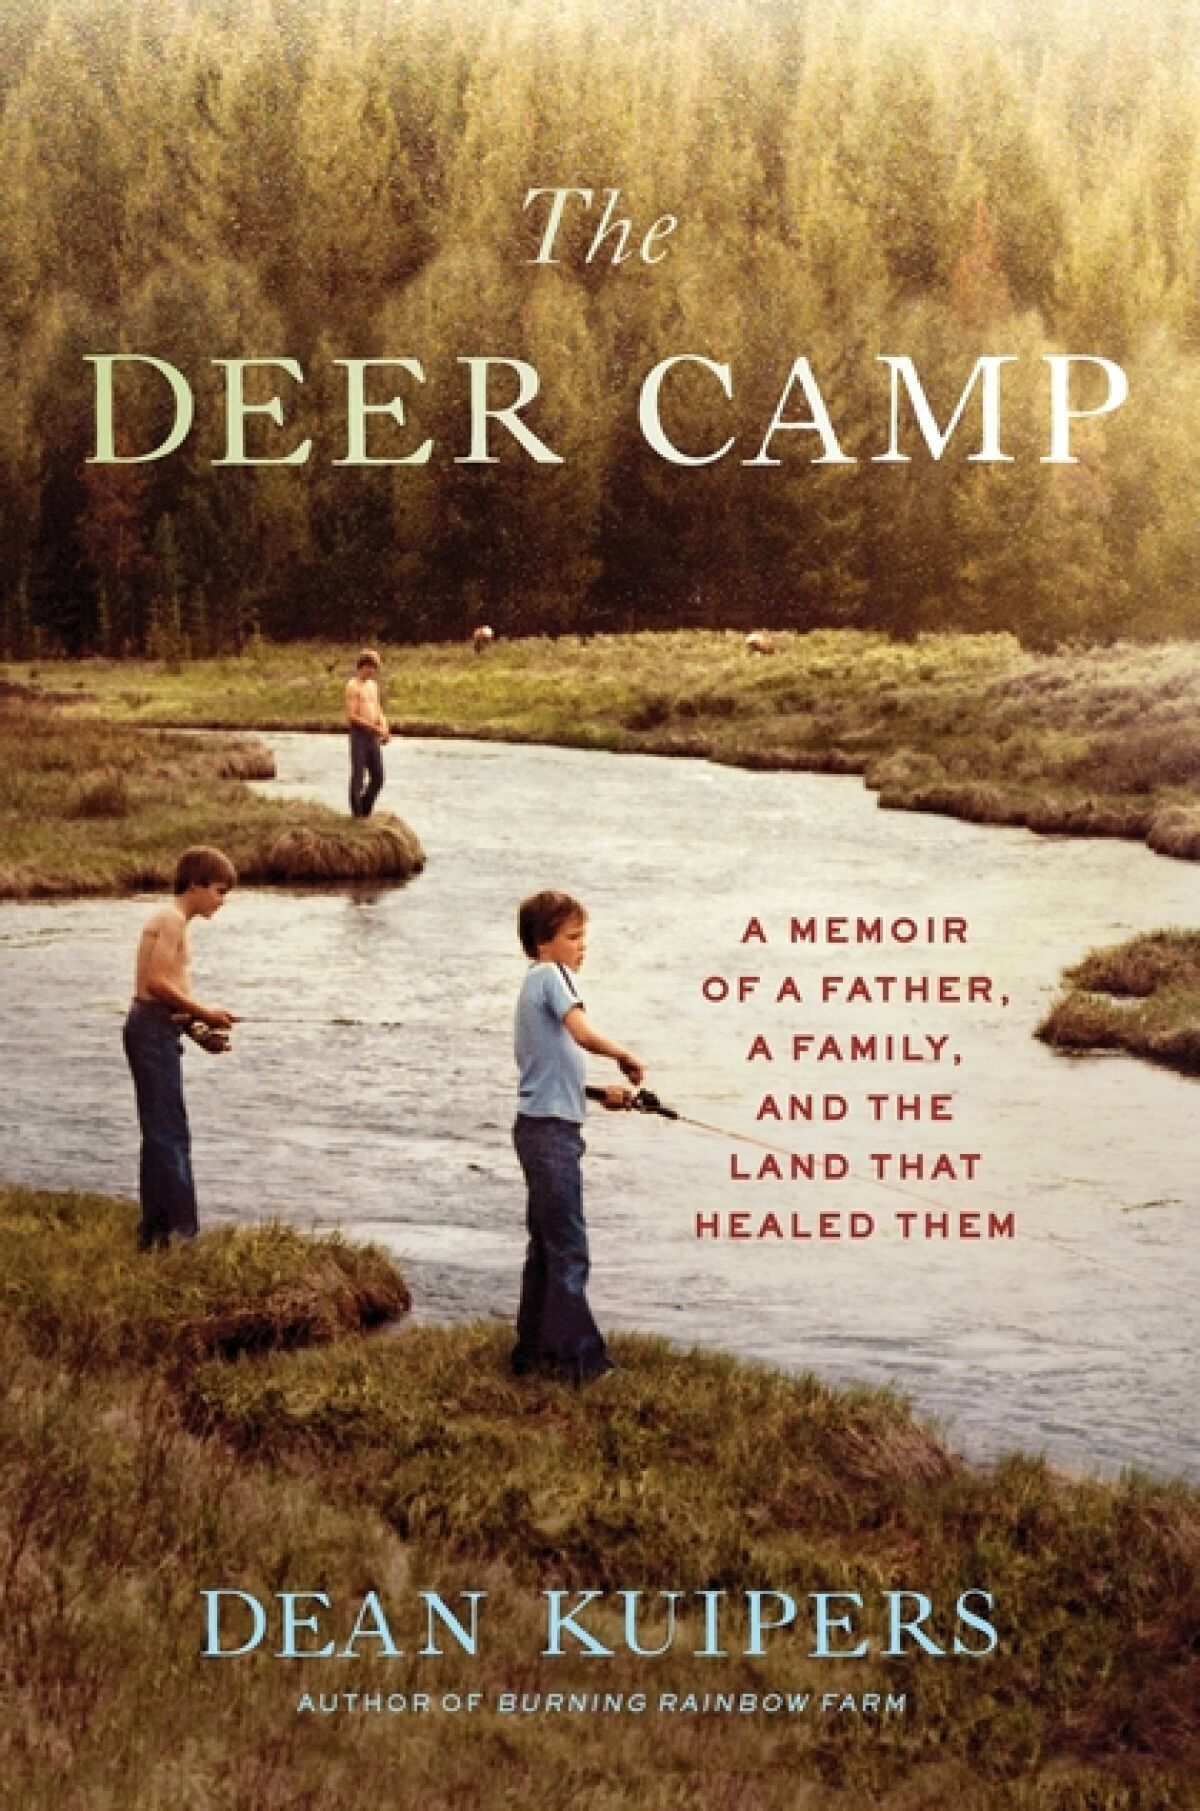 “The Deer Camp: A Memoir of a Father, a Family, and the Land that Healed Them” by Dean Kuipers